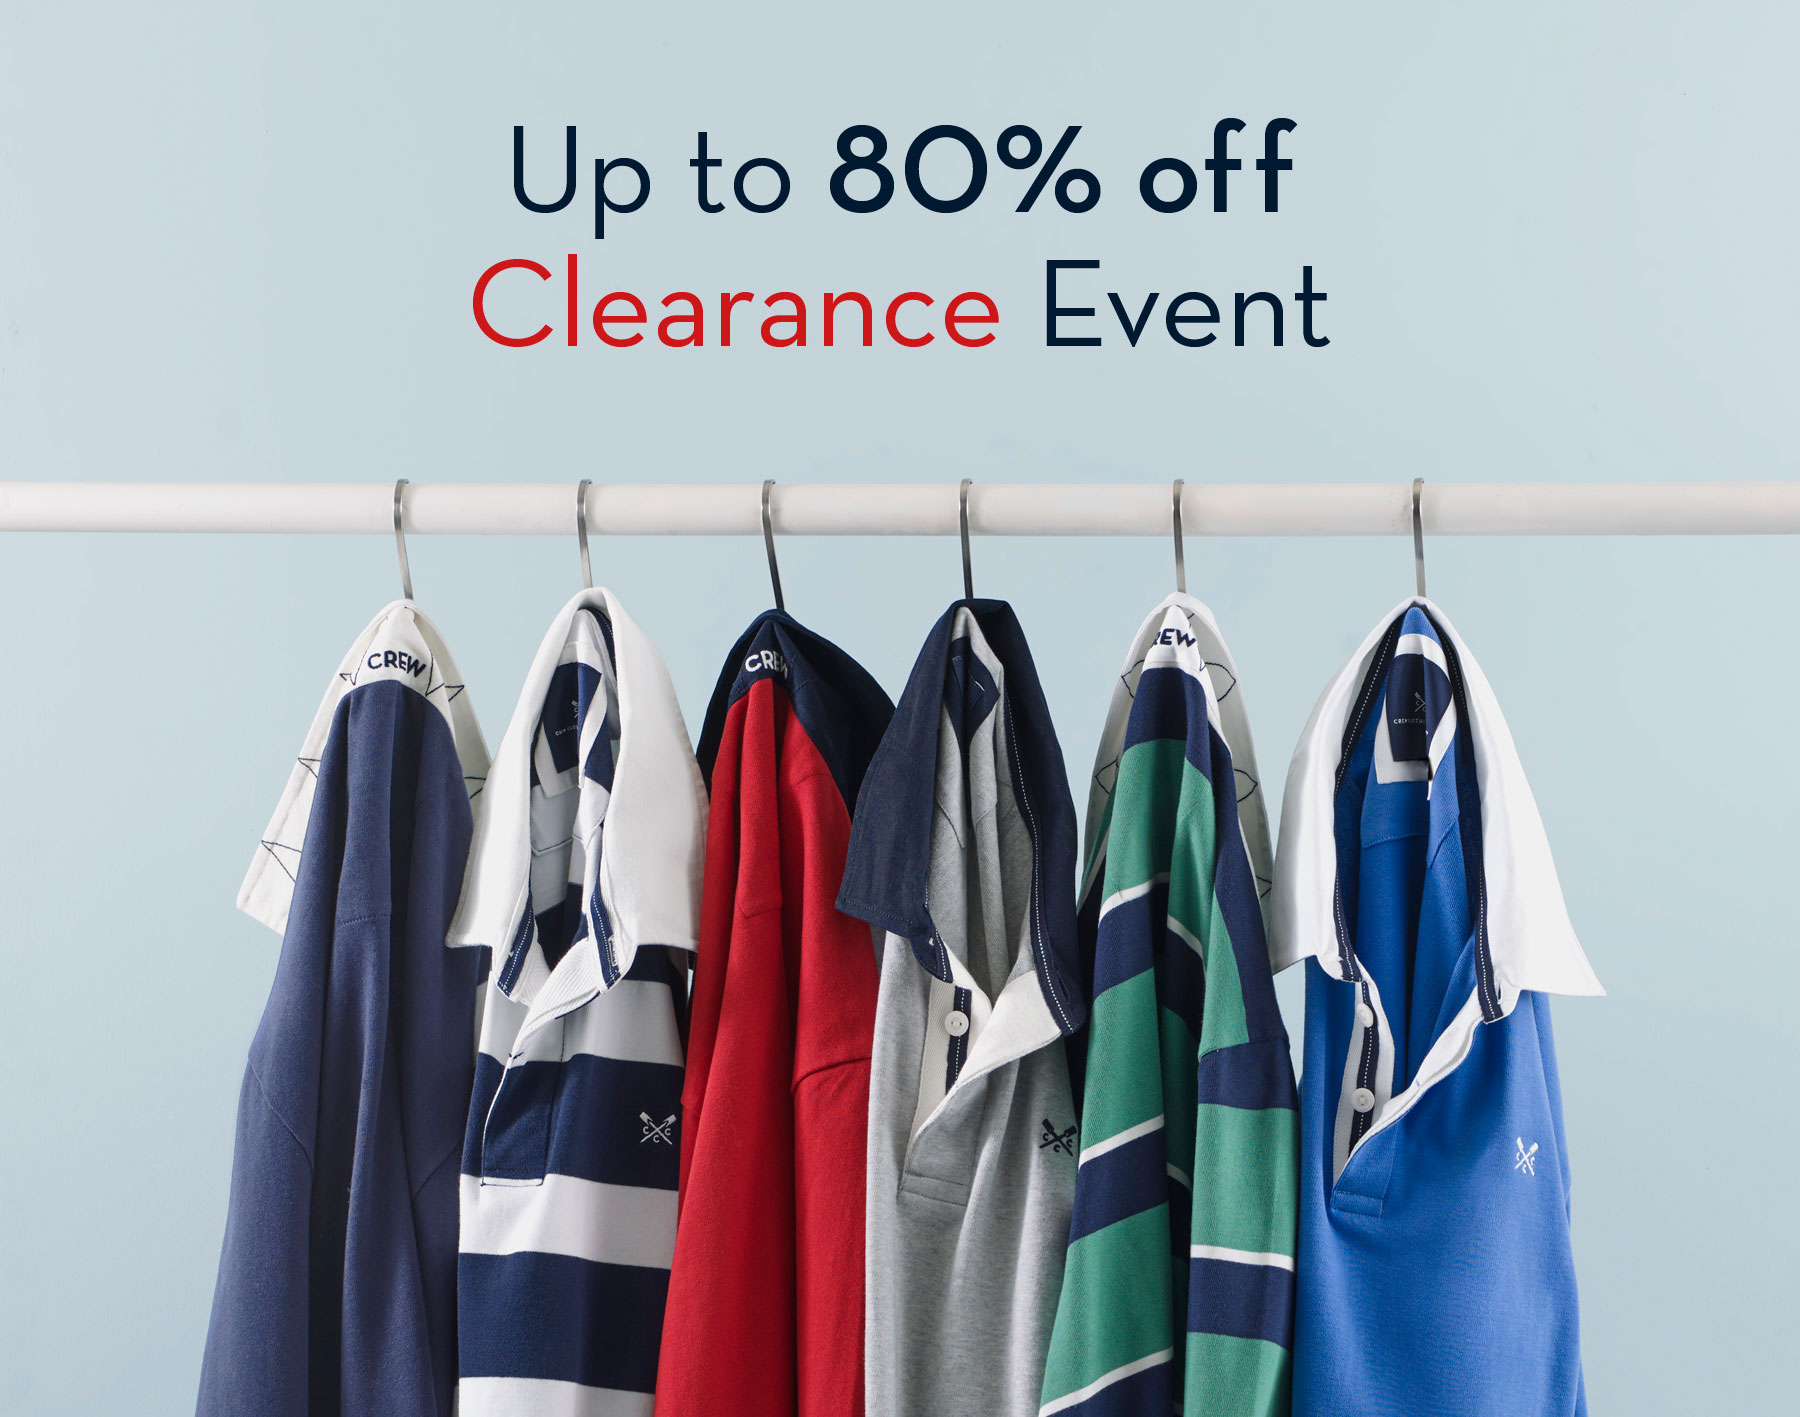 Clearance Events